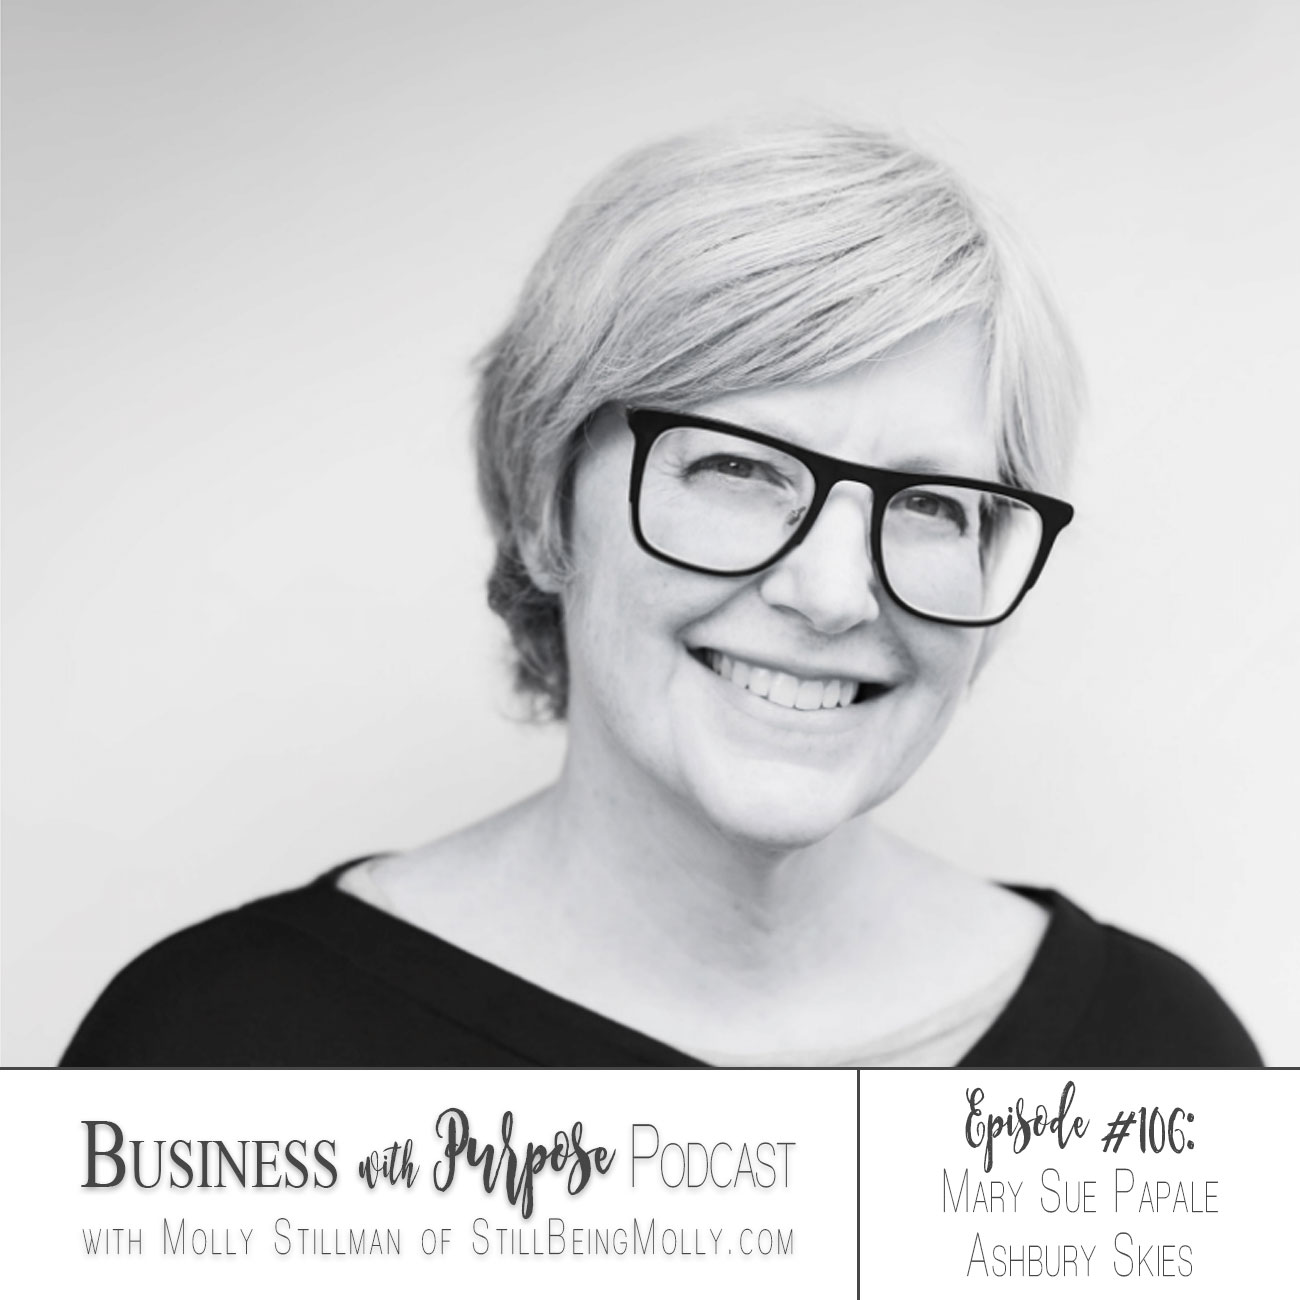 Business with Purpose Podcast EP 106: Mary Sue Papale, Ashbury Skies